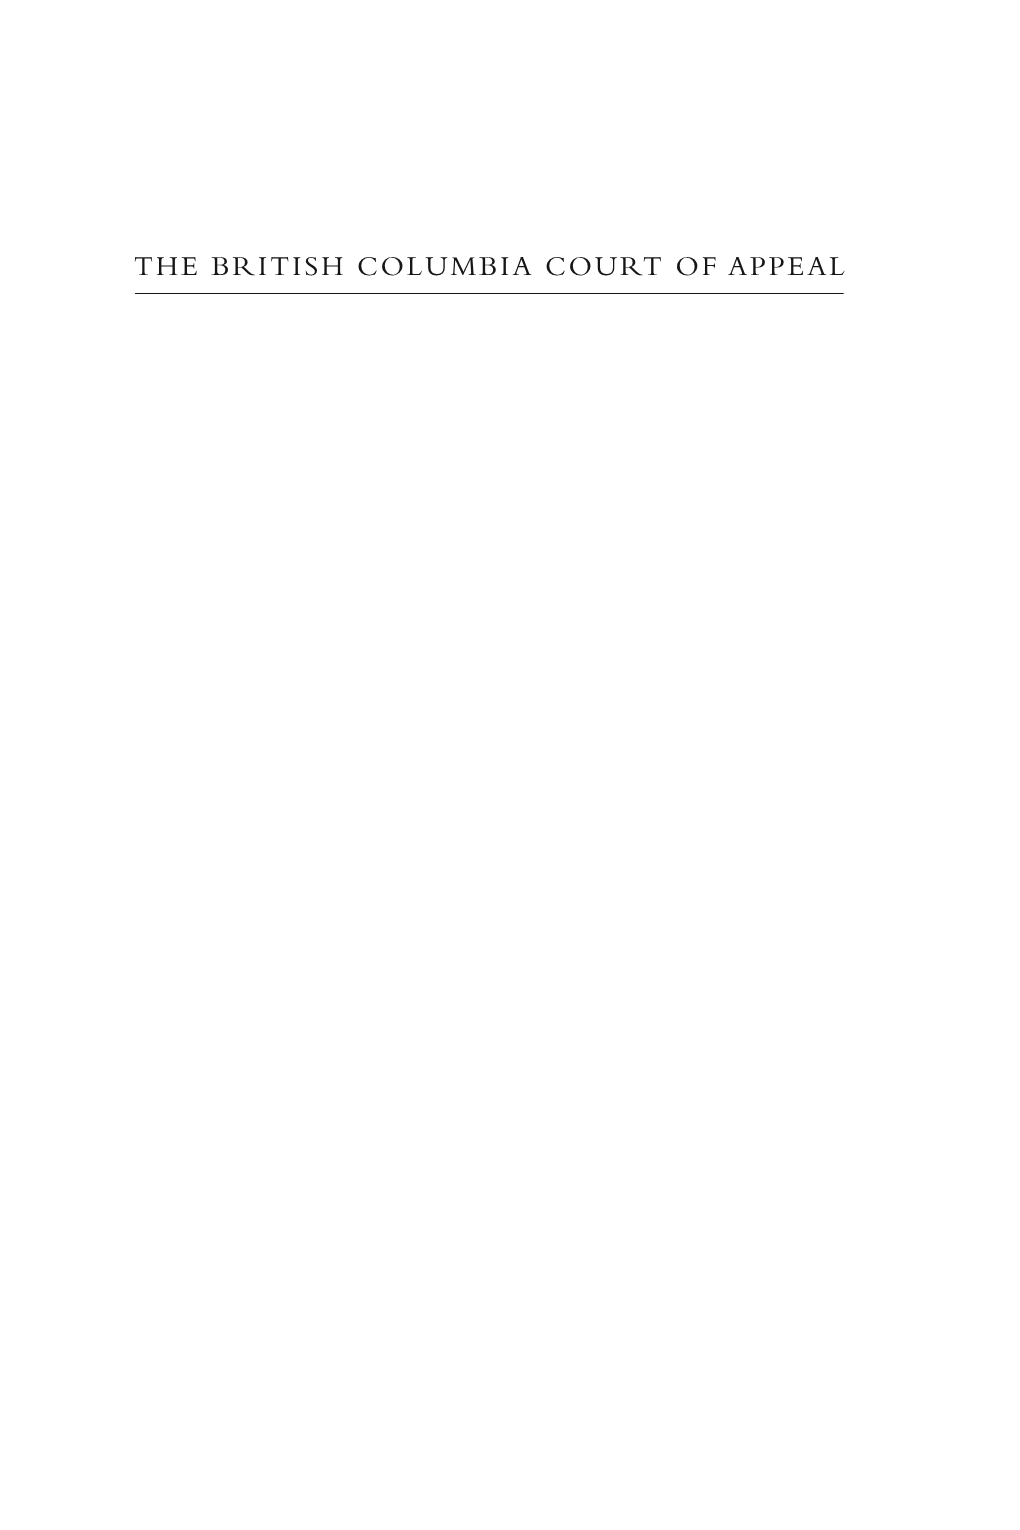 The British Columbia Court of Appeal